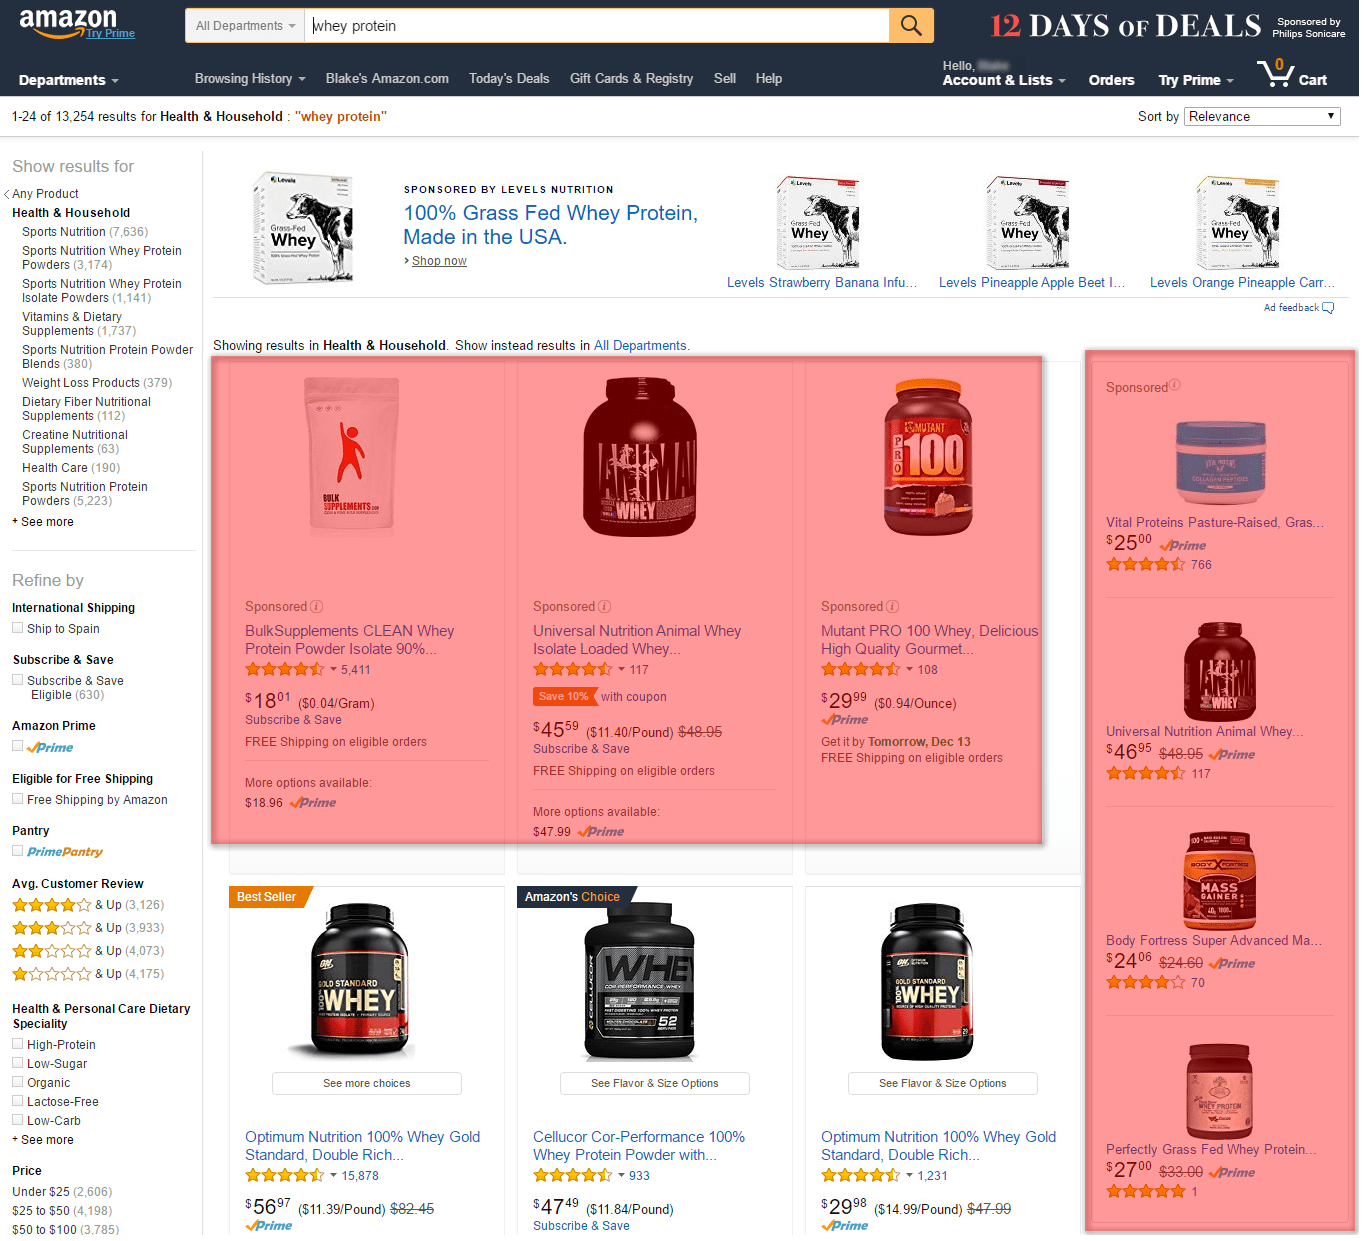 AMS Sponsored Products in Amazon search results